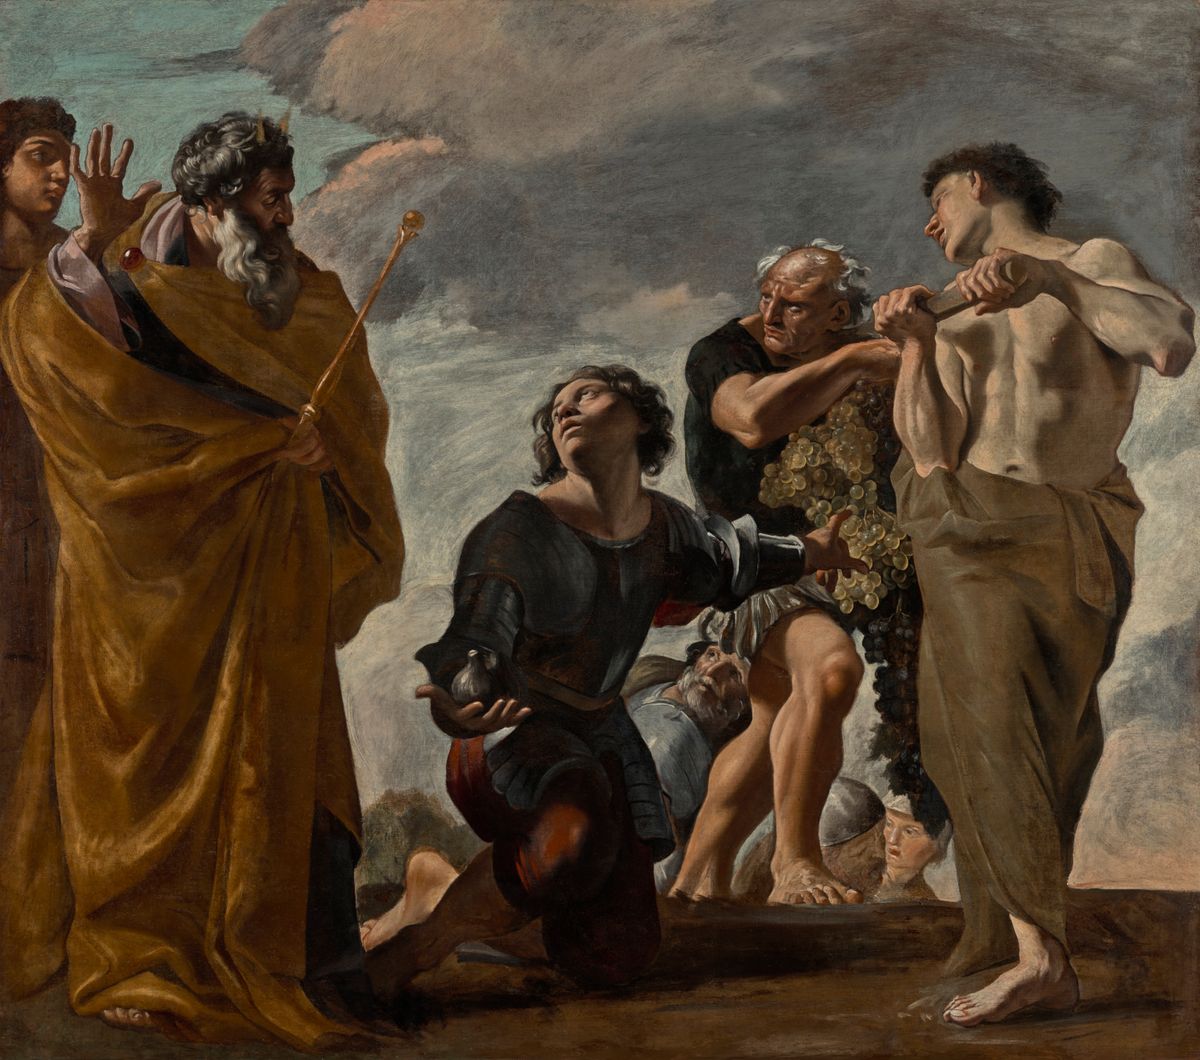 Moses and the Messengers from Canaan by Giovanni Lanfranco (1621-1624) - Public Domain Bible Painting